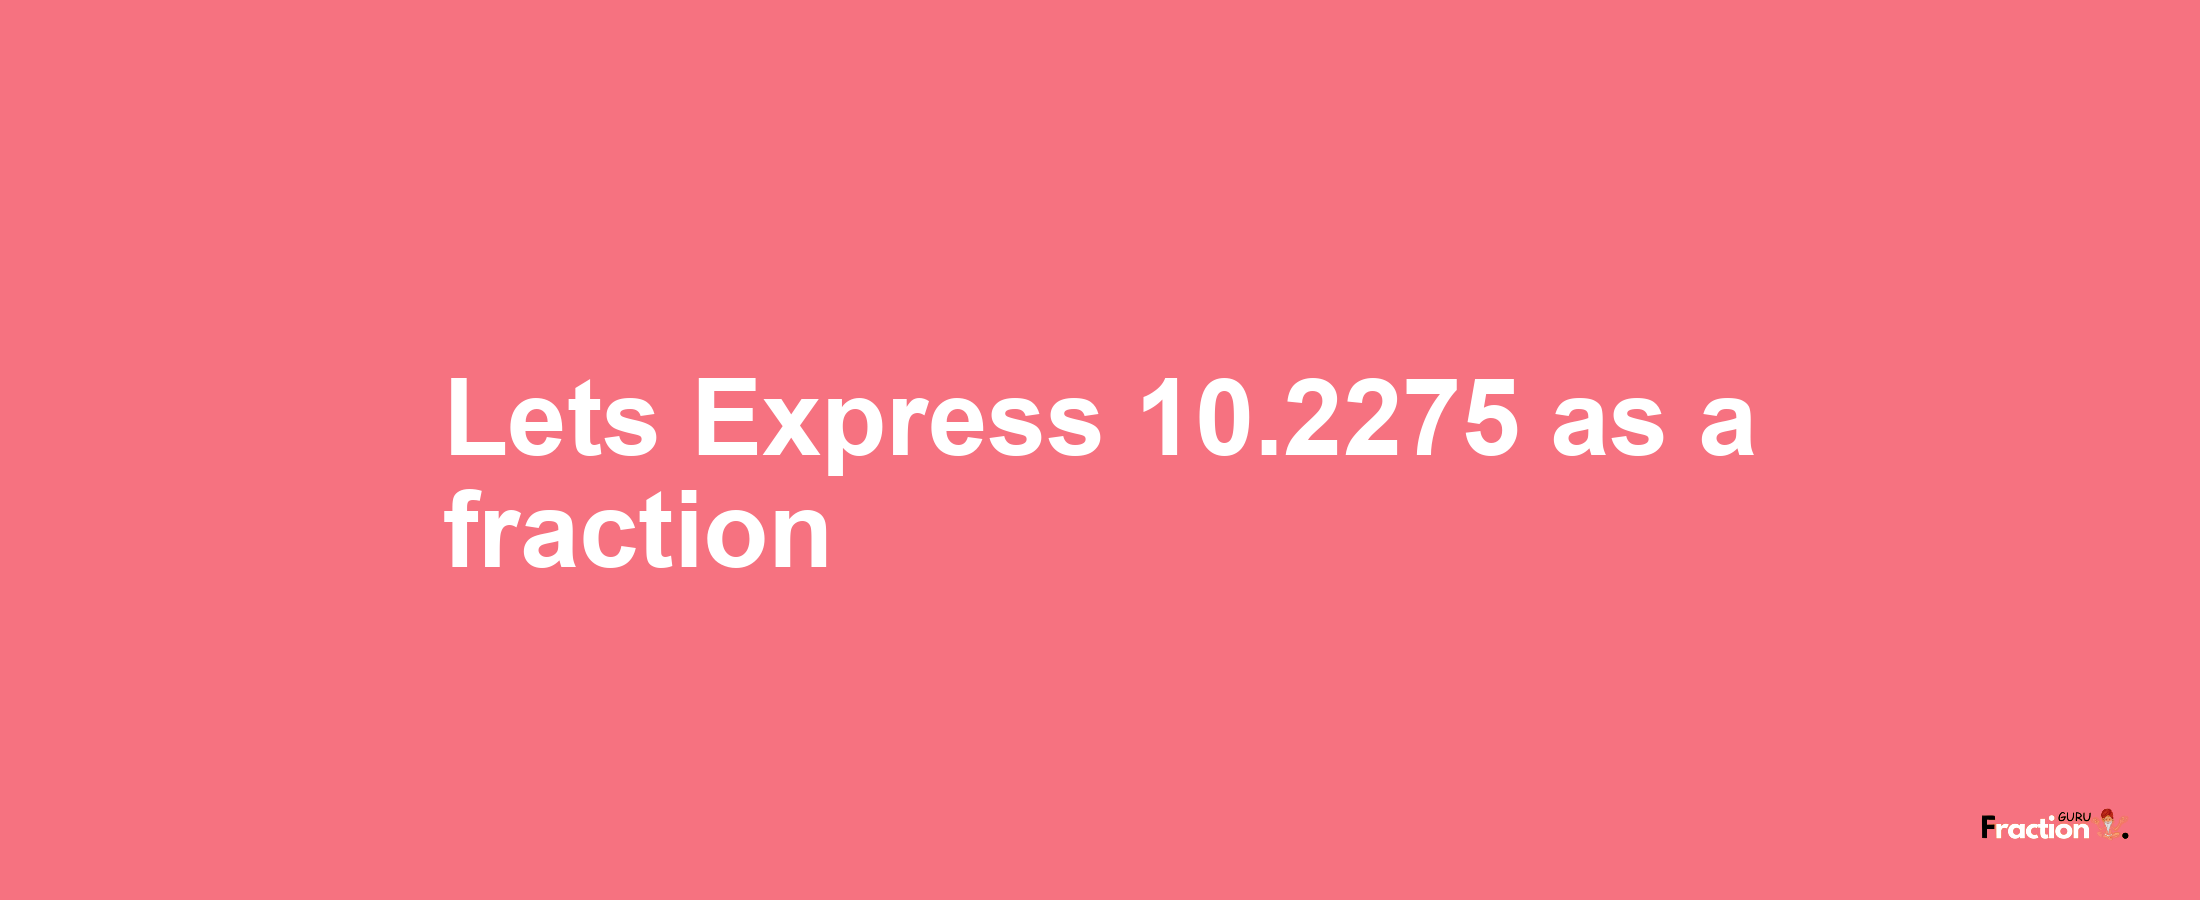 Lets Express 10.2275 as afraction